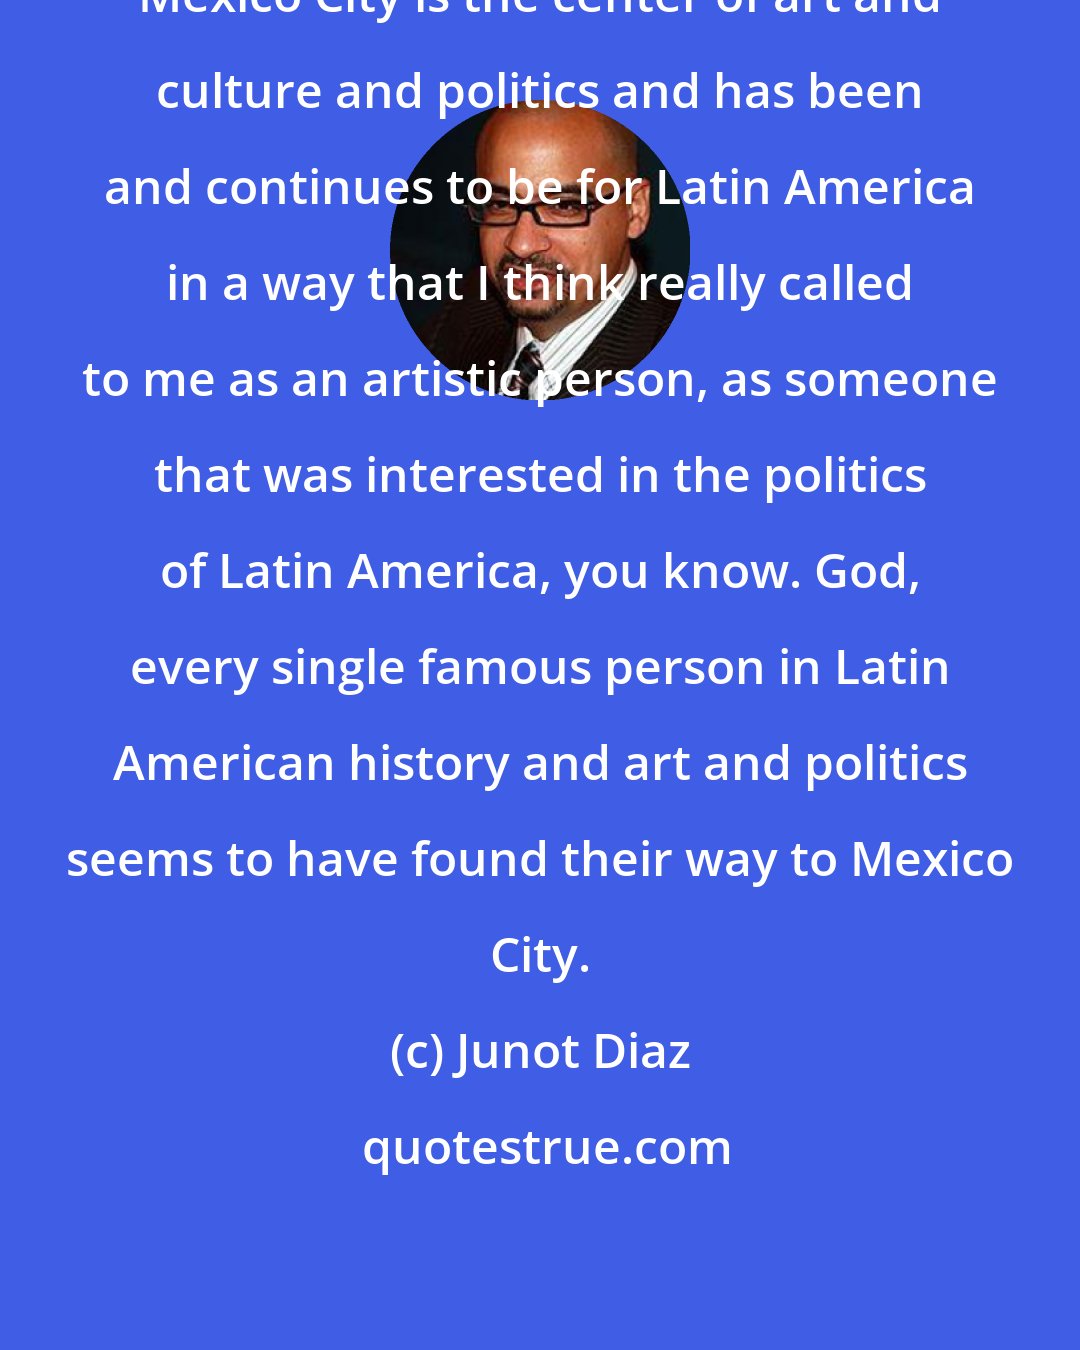 Junot Diaz: Mexico City is the center of art and culture and politics and has been and continues to be for Latin America in a way that I think really called to me as an artistic person, as someone that was interested in the politics of Latin America, you know. God, every single famous person in Latin American history and art and politics seems to have found their way to Mexico City.